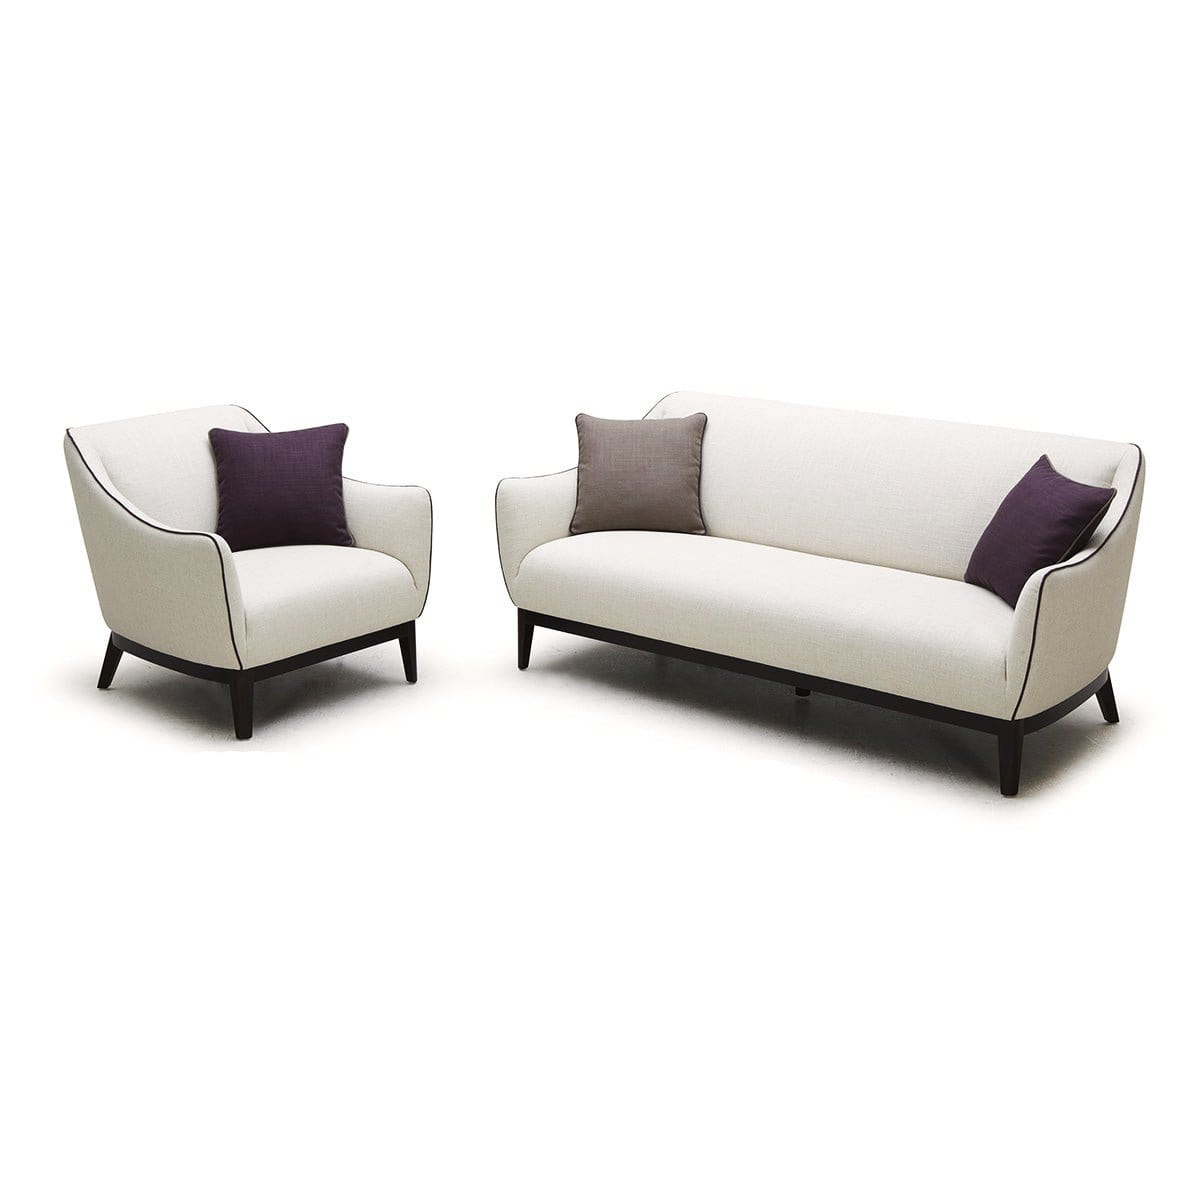 KUKA #2556 3 Seater Fabric Sofa (Color: C-1075/1077) picket and rail